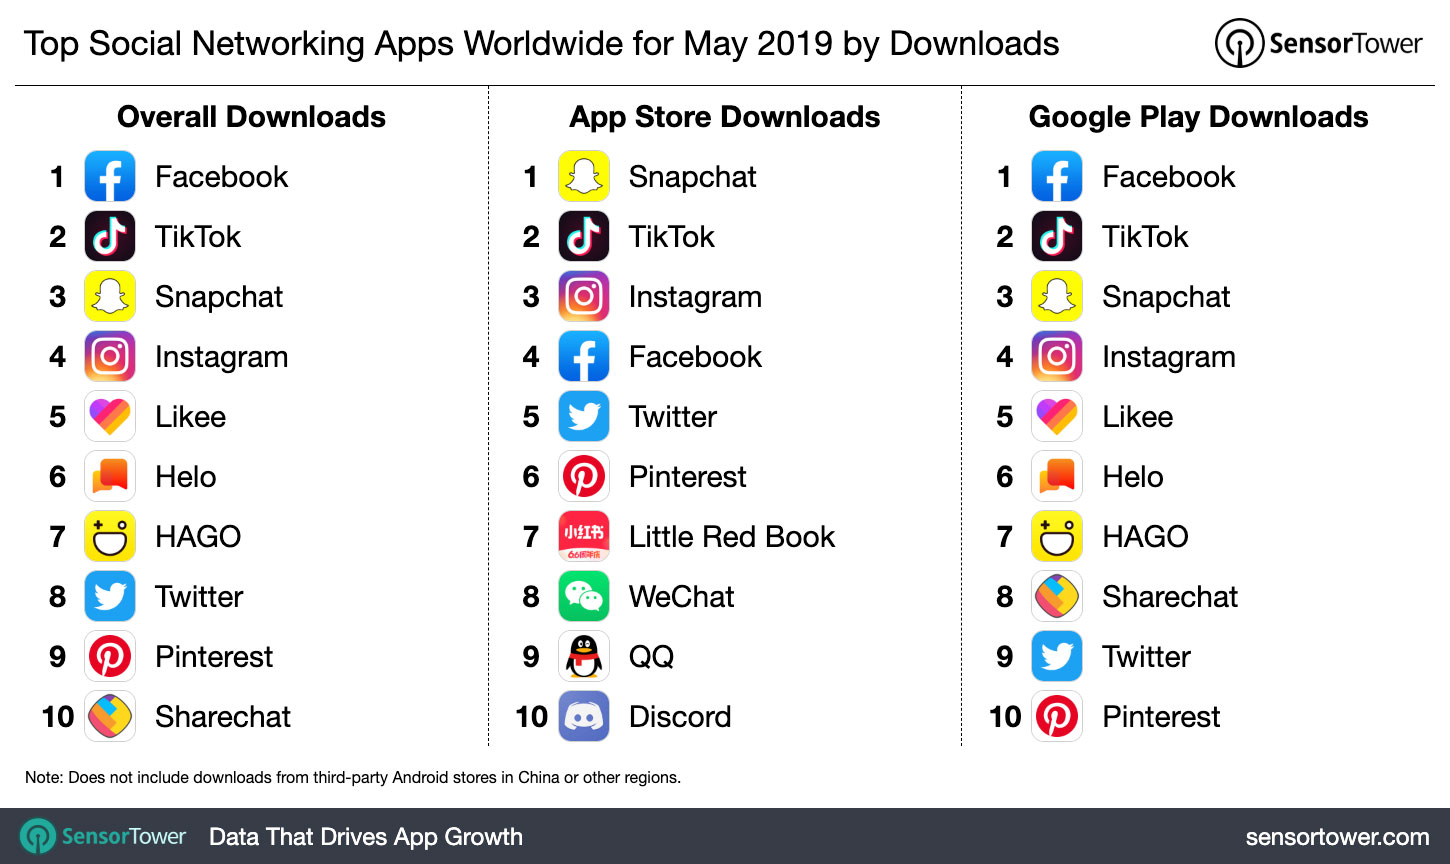 Top Social Networking Apps Worldwide for May 2019 by Downloads